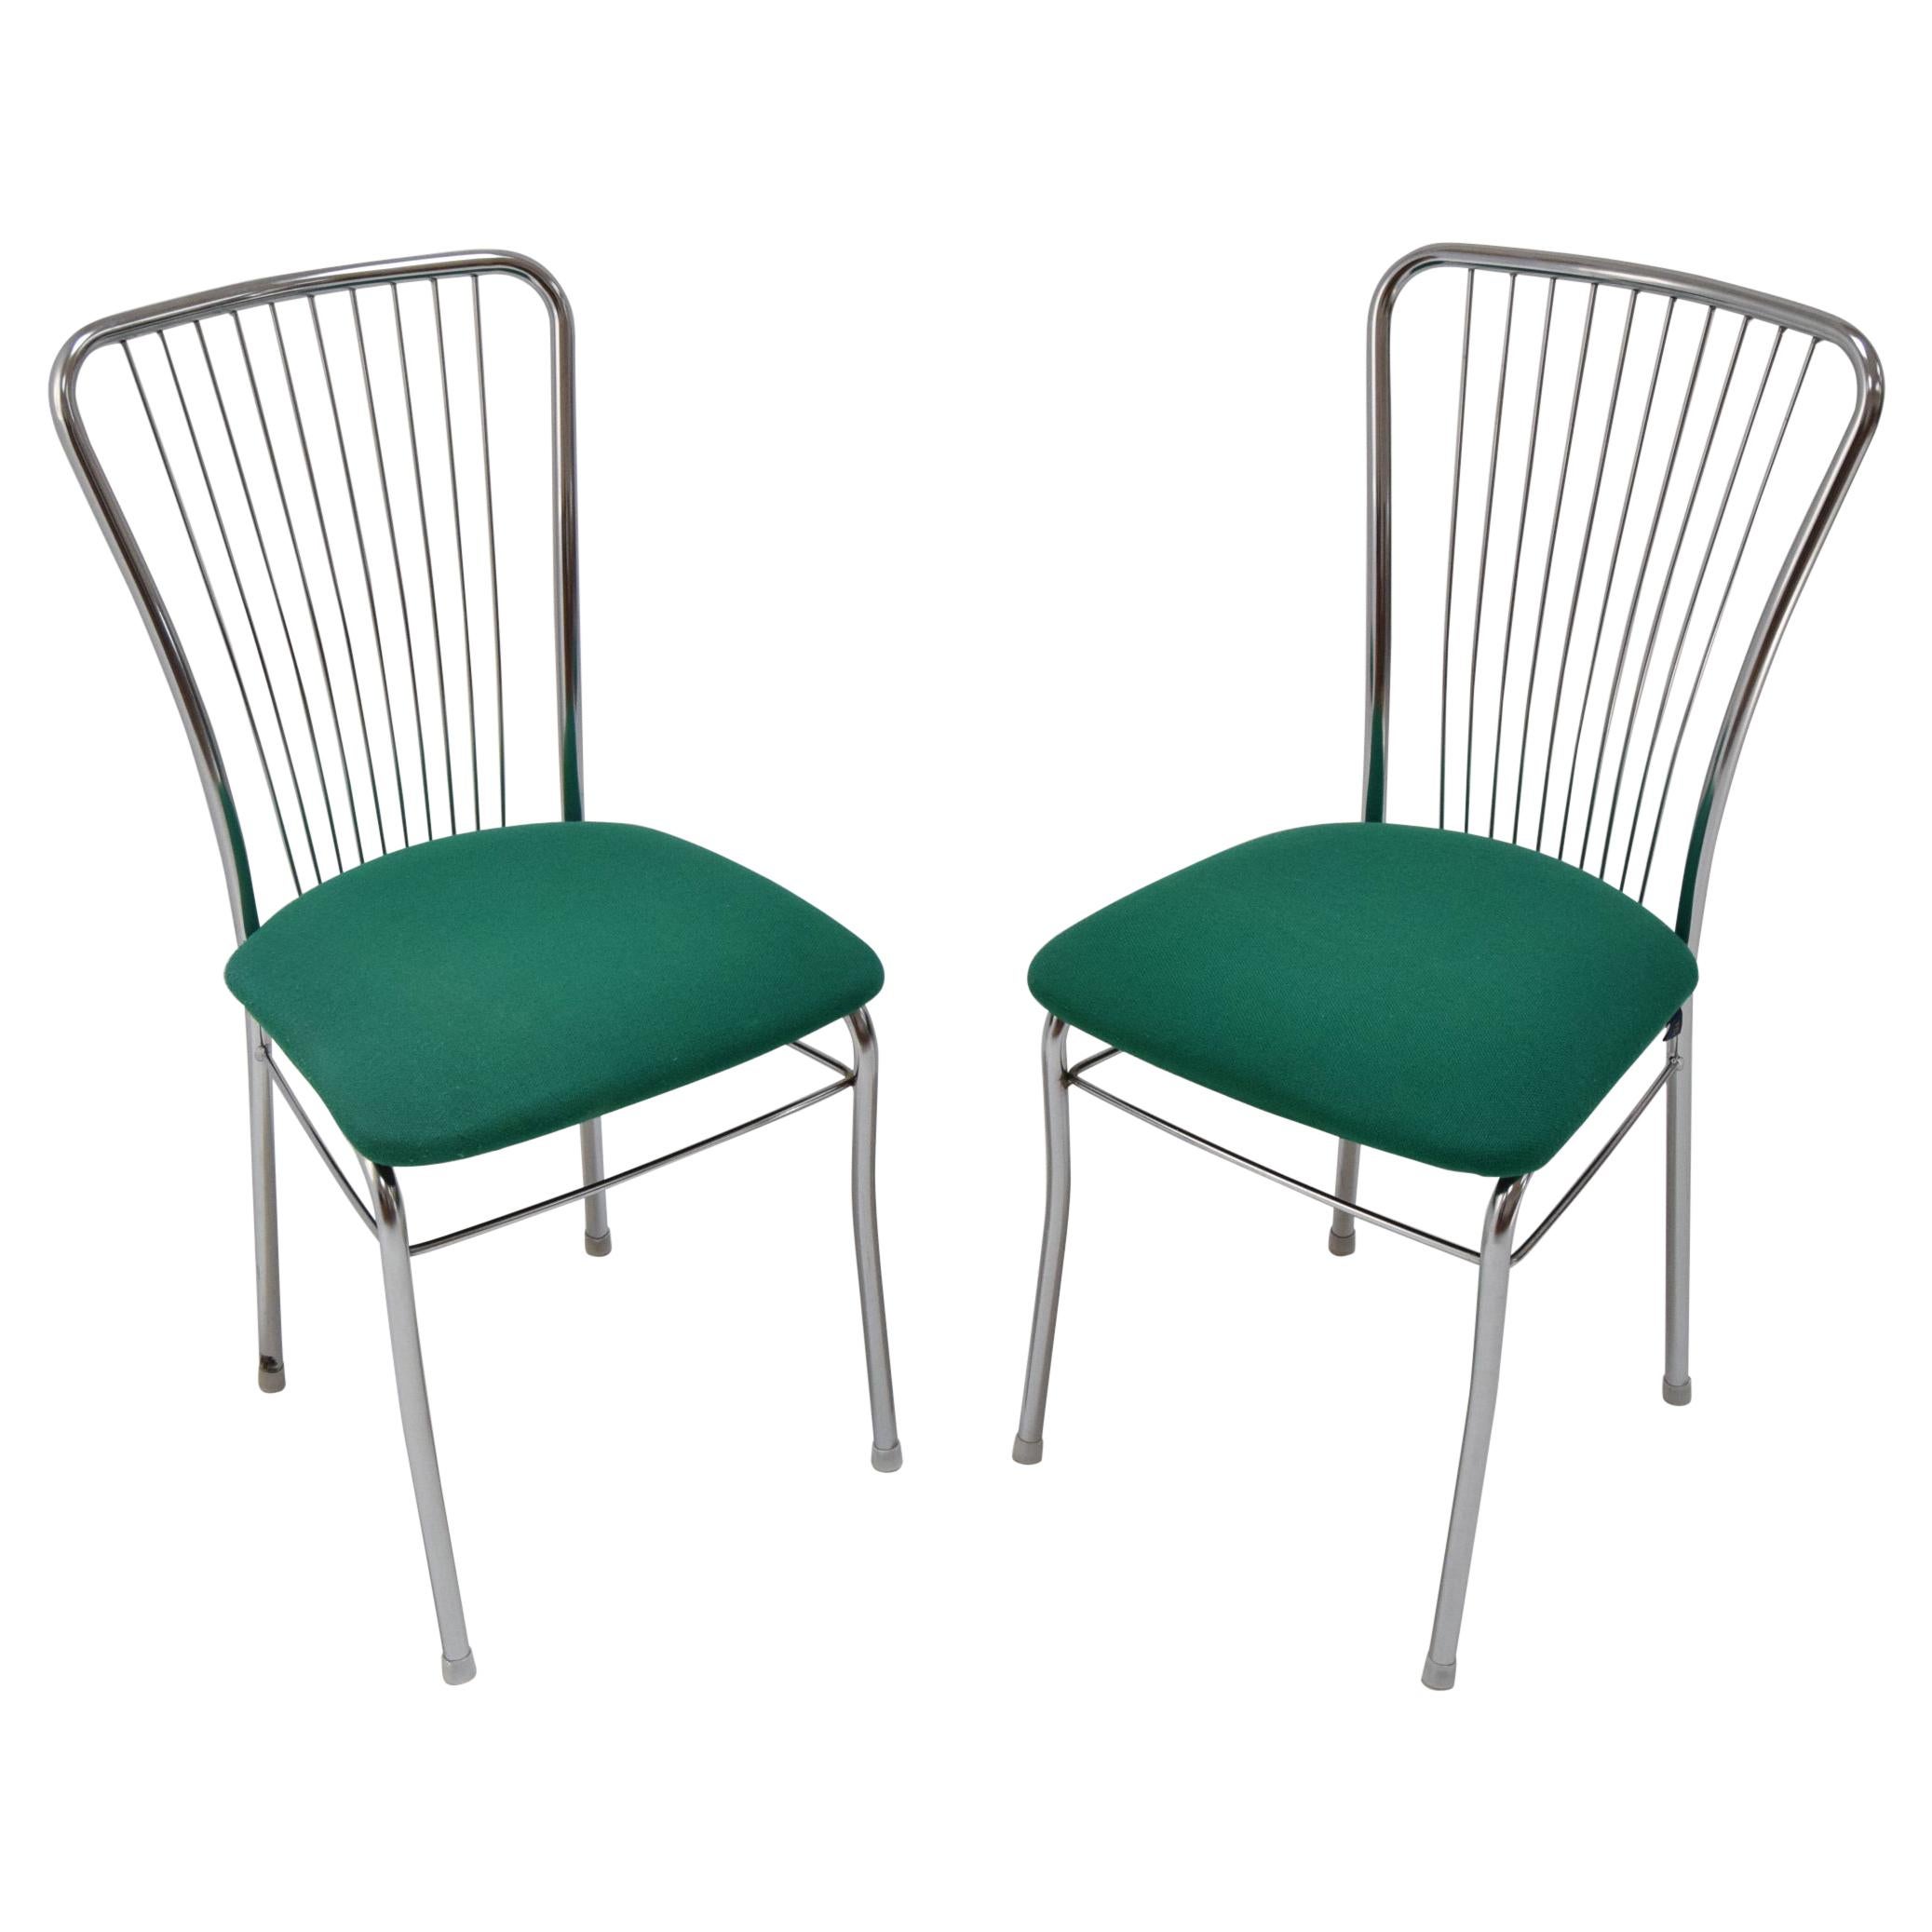 Pair of Mid-Century Chrome Chairs, Nowy Styl, circa 1980's For Sale